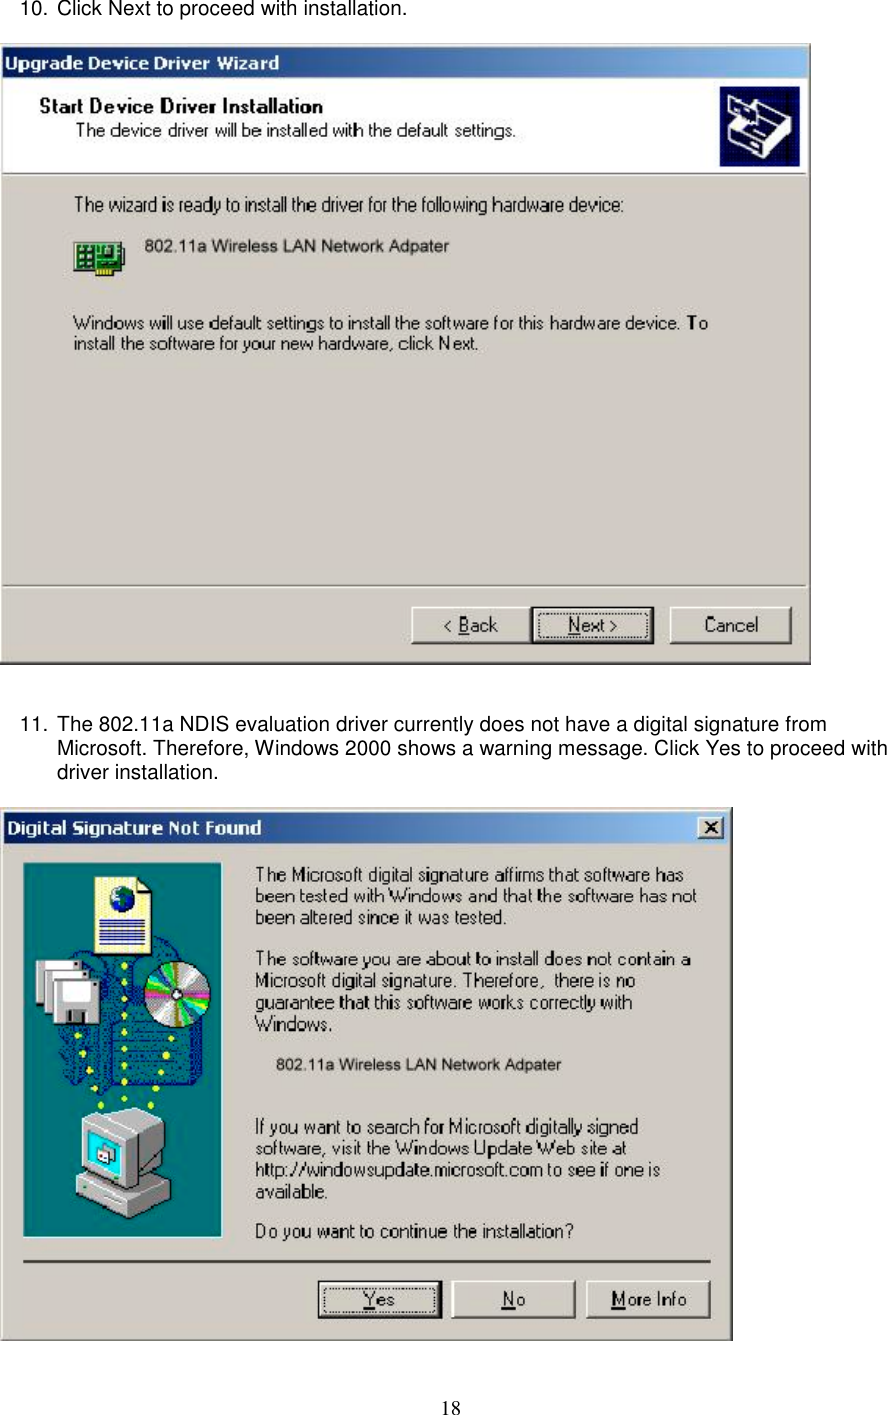 1810. Click Next to proceed with installation.11. The 802.11a NDIS evaluation driver currently does not have a digital signature fromMicrosoft. Therefore, Windows 2000 shows a warning message. Click Yes to proceed withdriver installation.